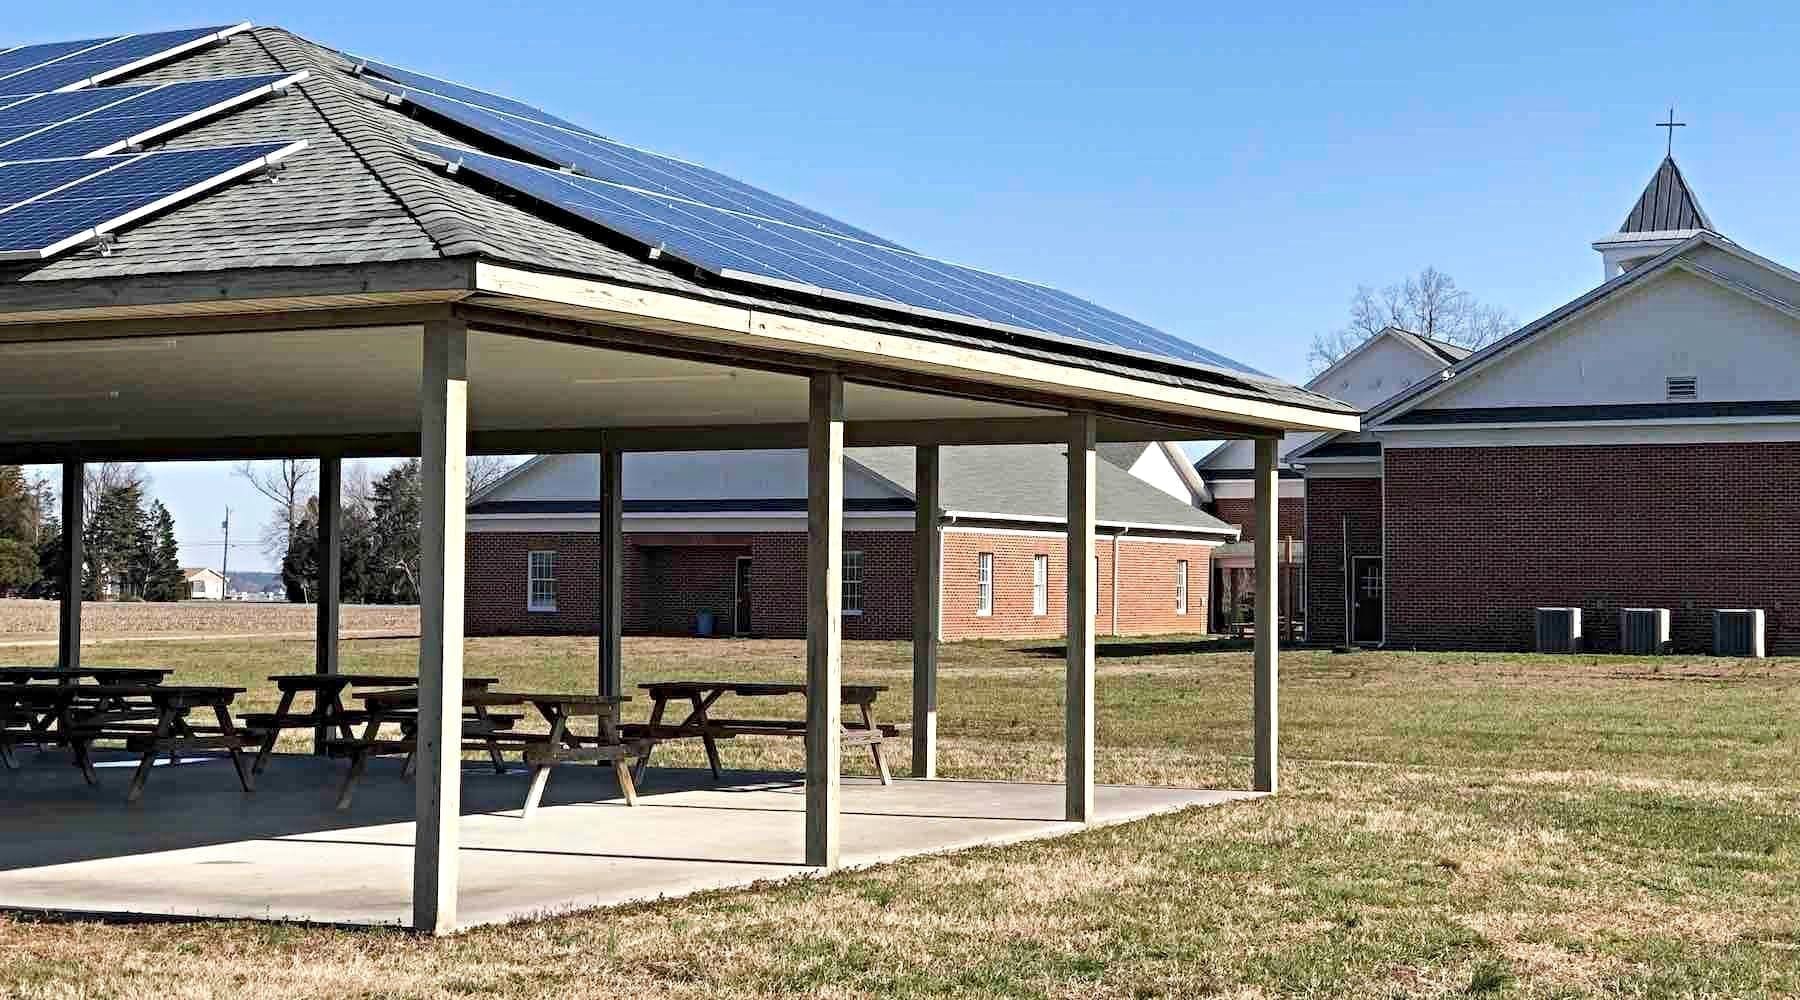 How One Baptist Church Going Solar Affected Their Community